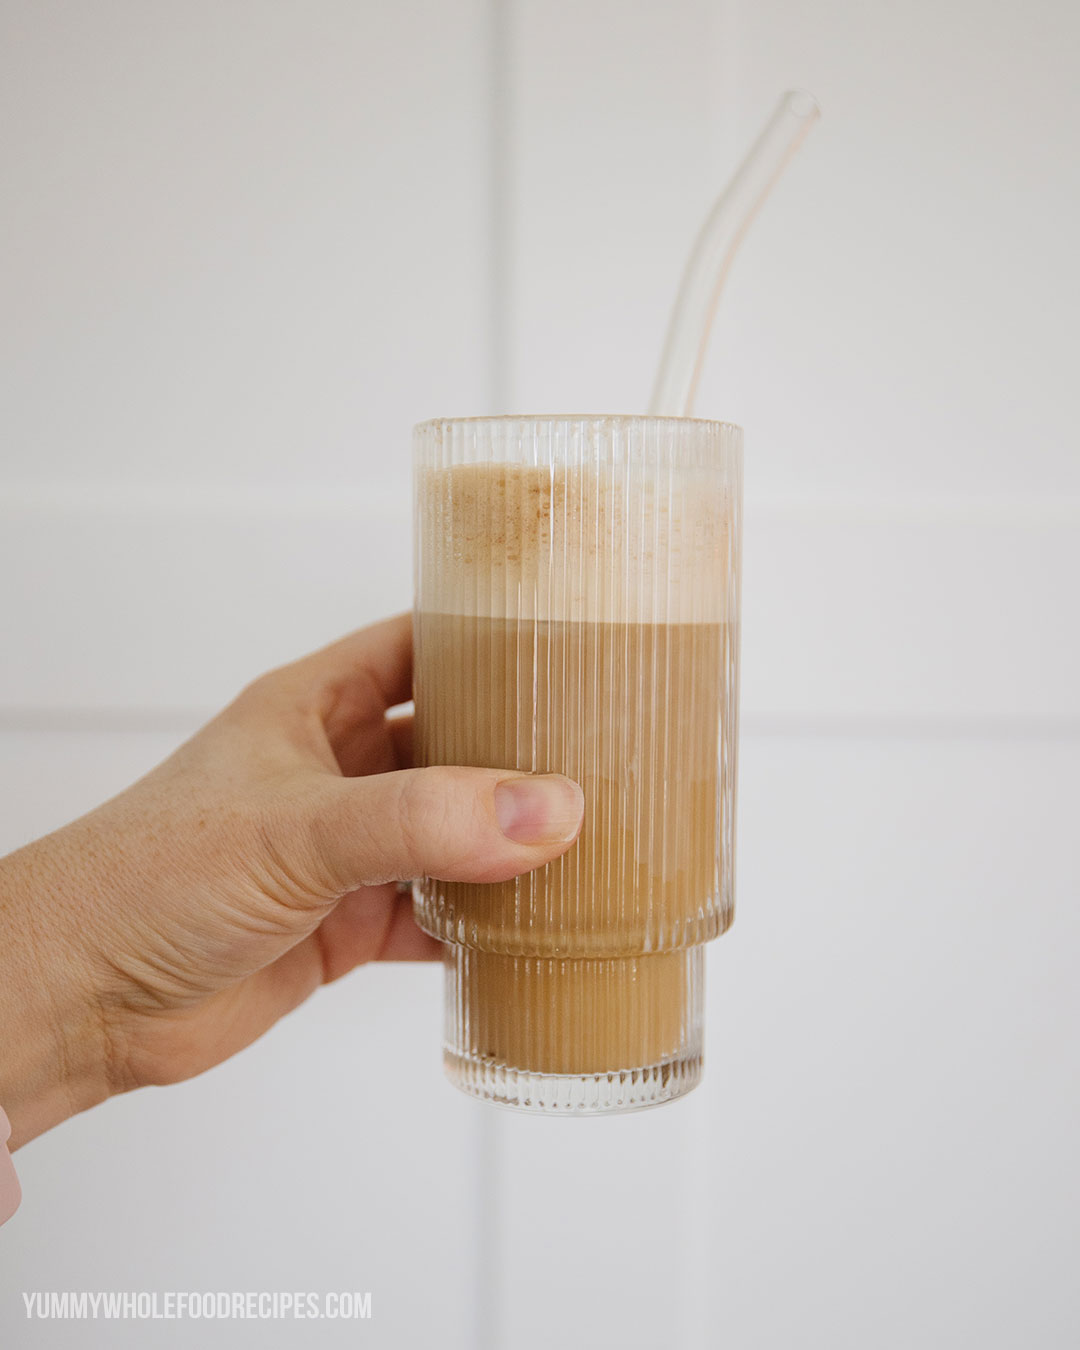 https://yummywholefoodrecipes.com/wp-content/uploads/2023/04/Iced-Coffee-with-Nespresso-Vertuo-1.jpg